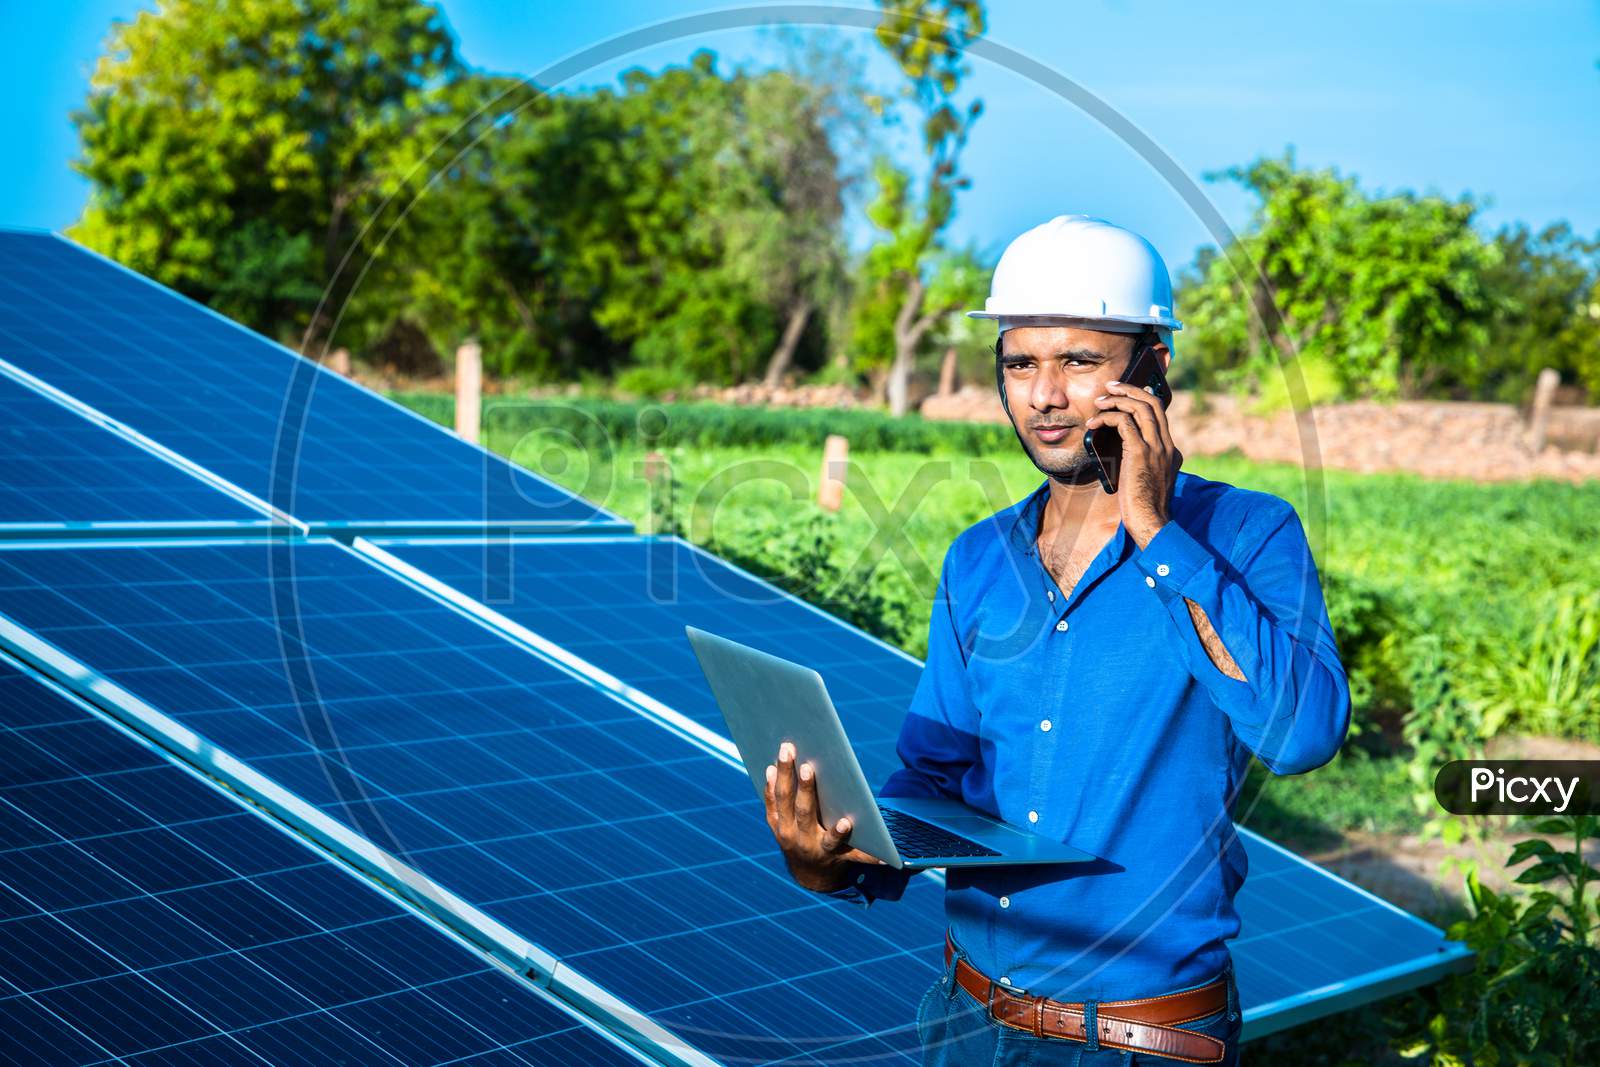 Young Male Engineer Talking On Phone With Laptop In Hand Standing Near Solar Panels, Agriculture Farm Land With Clear Blue Sky Background, Renewable Energy, Clean Energy.